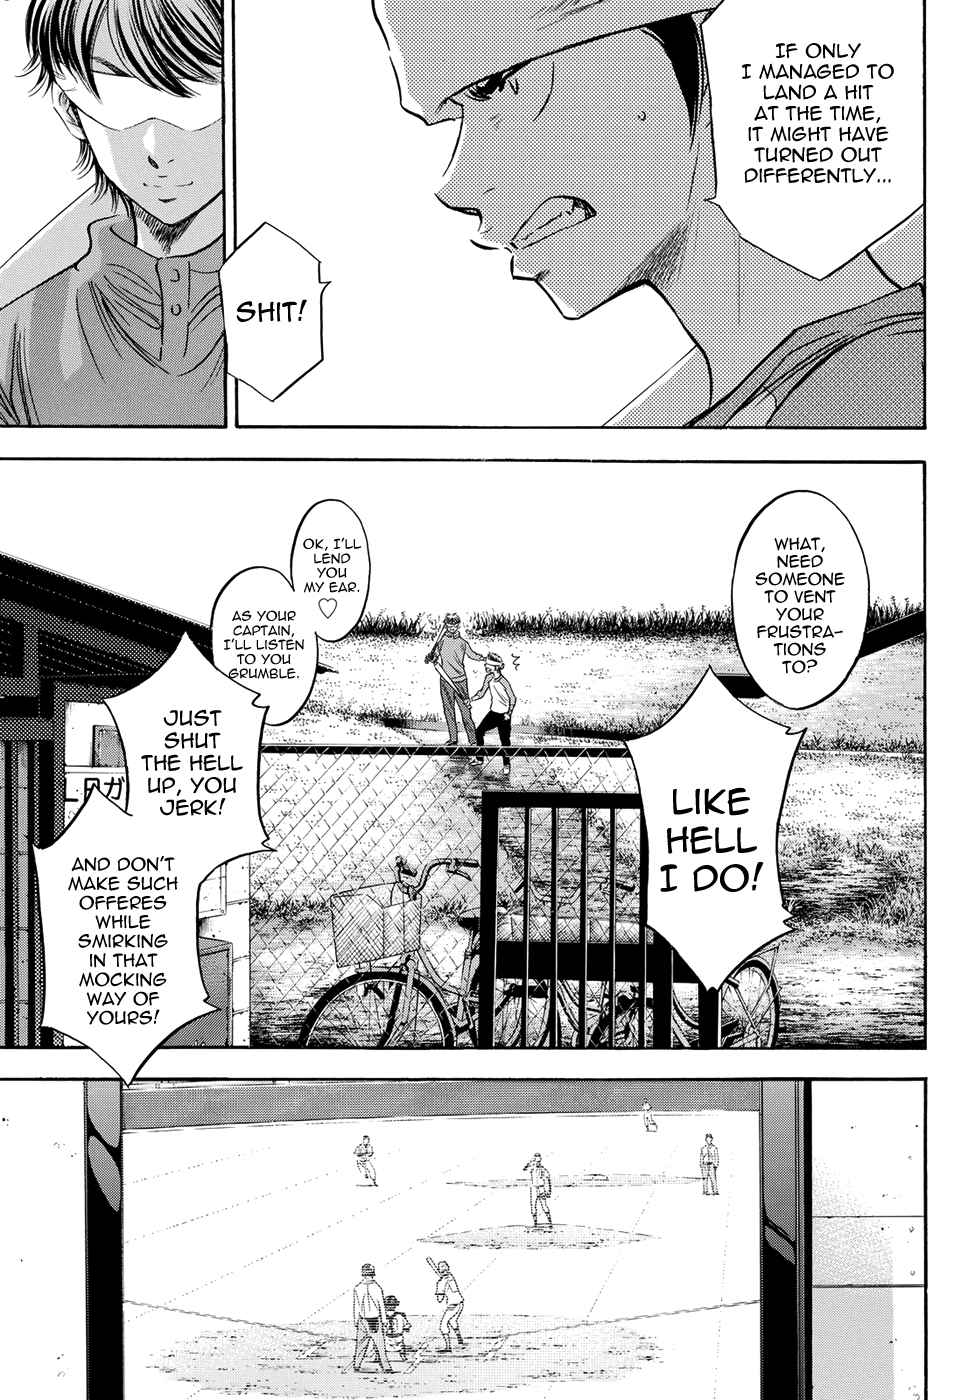 Diamond no Ace Act II Vol. 6 Ch. 50 We Can't Lose Either